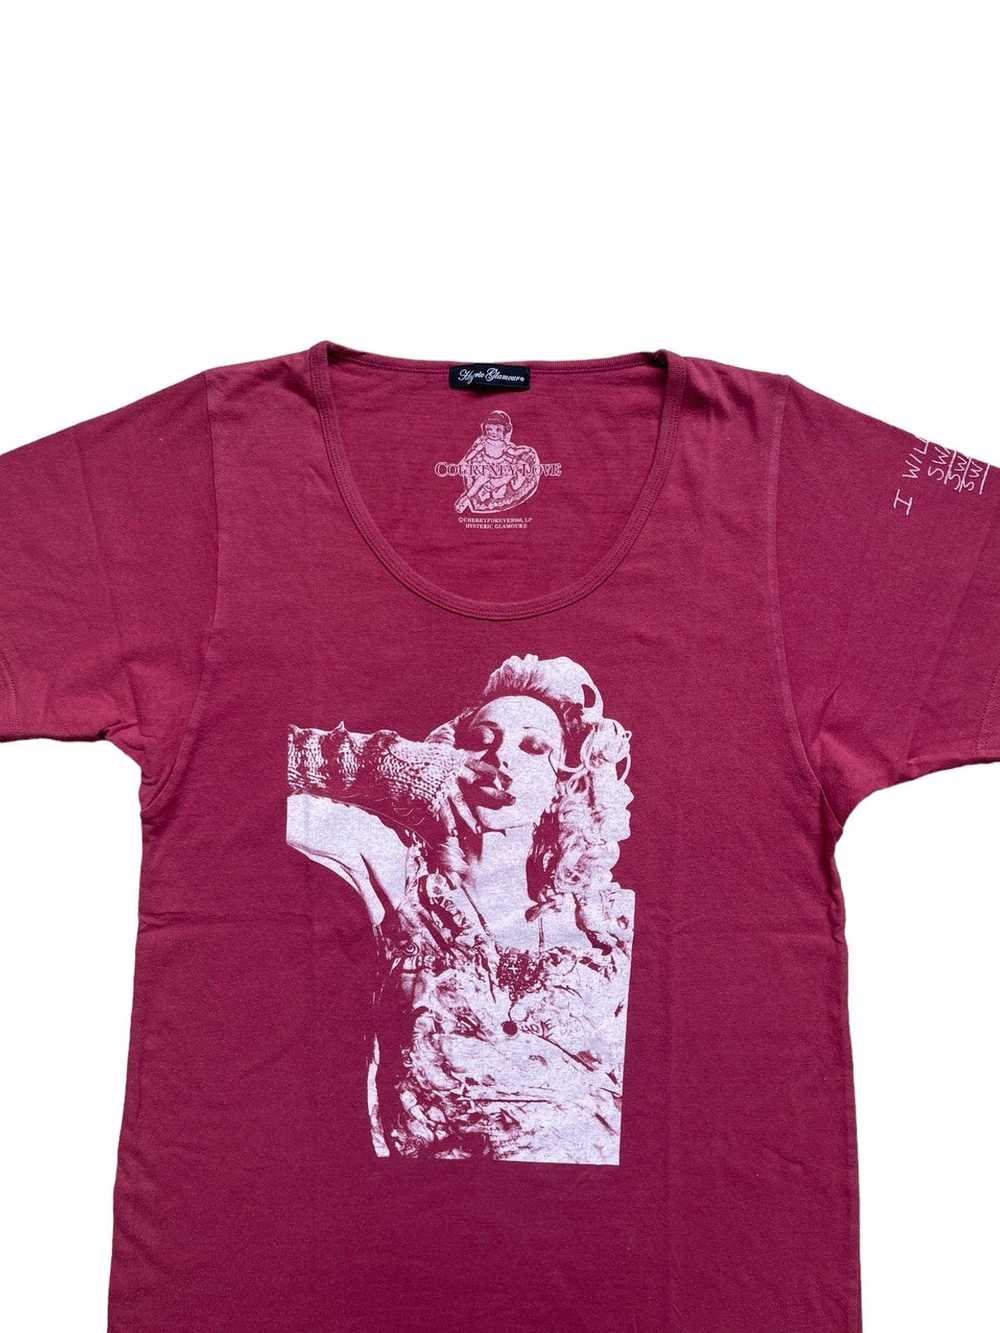 Hysteric Glamour Hysteric Glamour X Courtney Love… - image 3